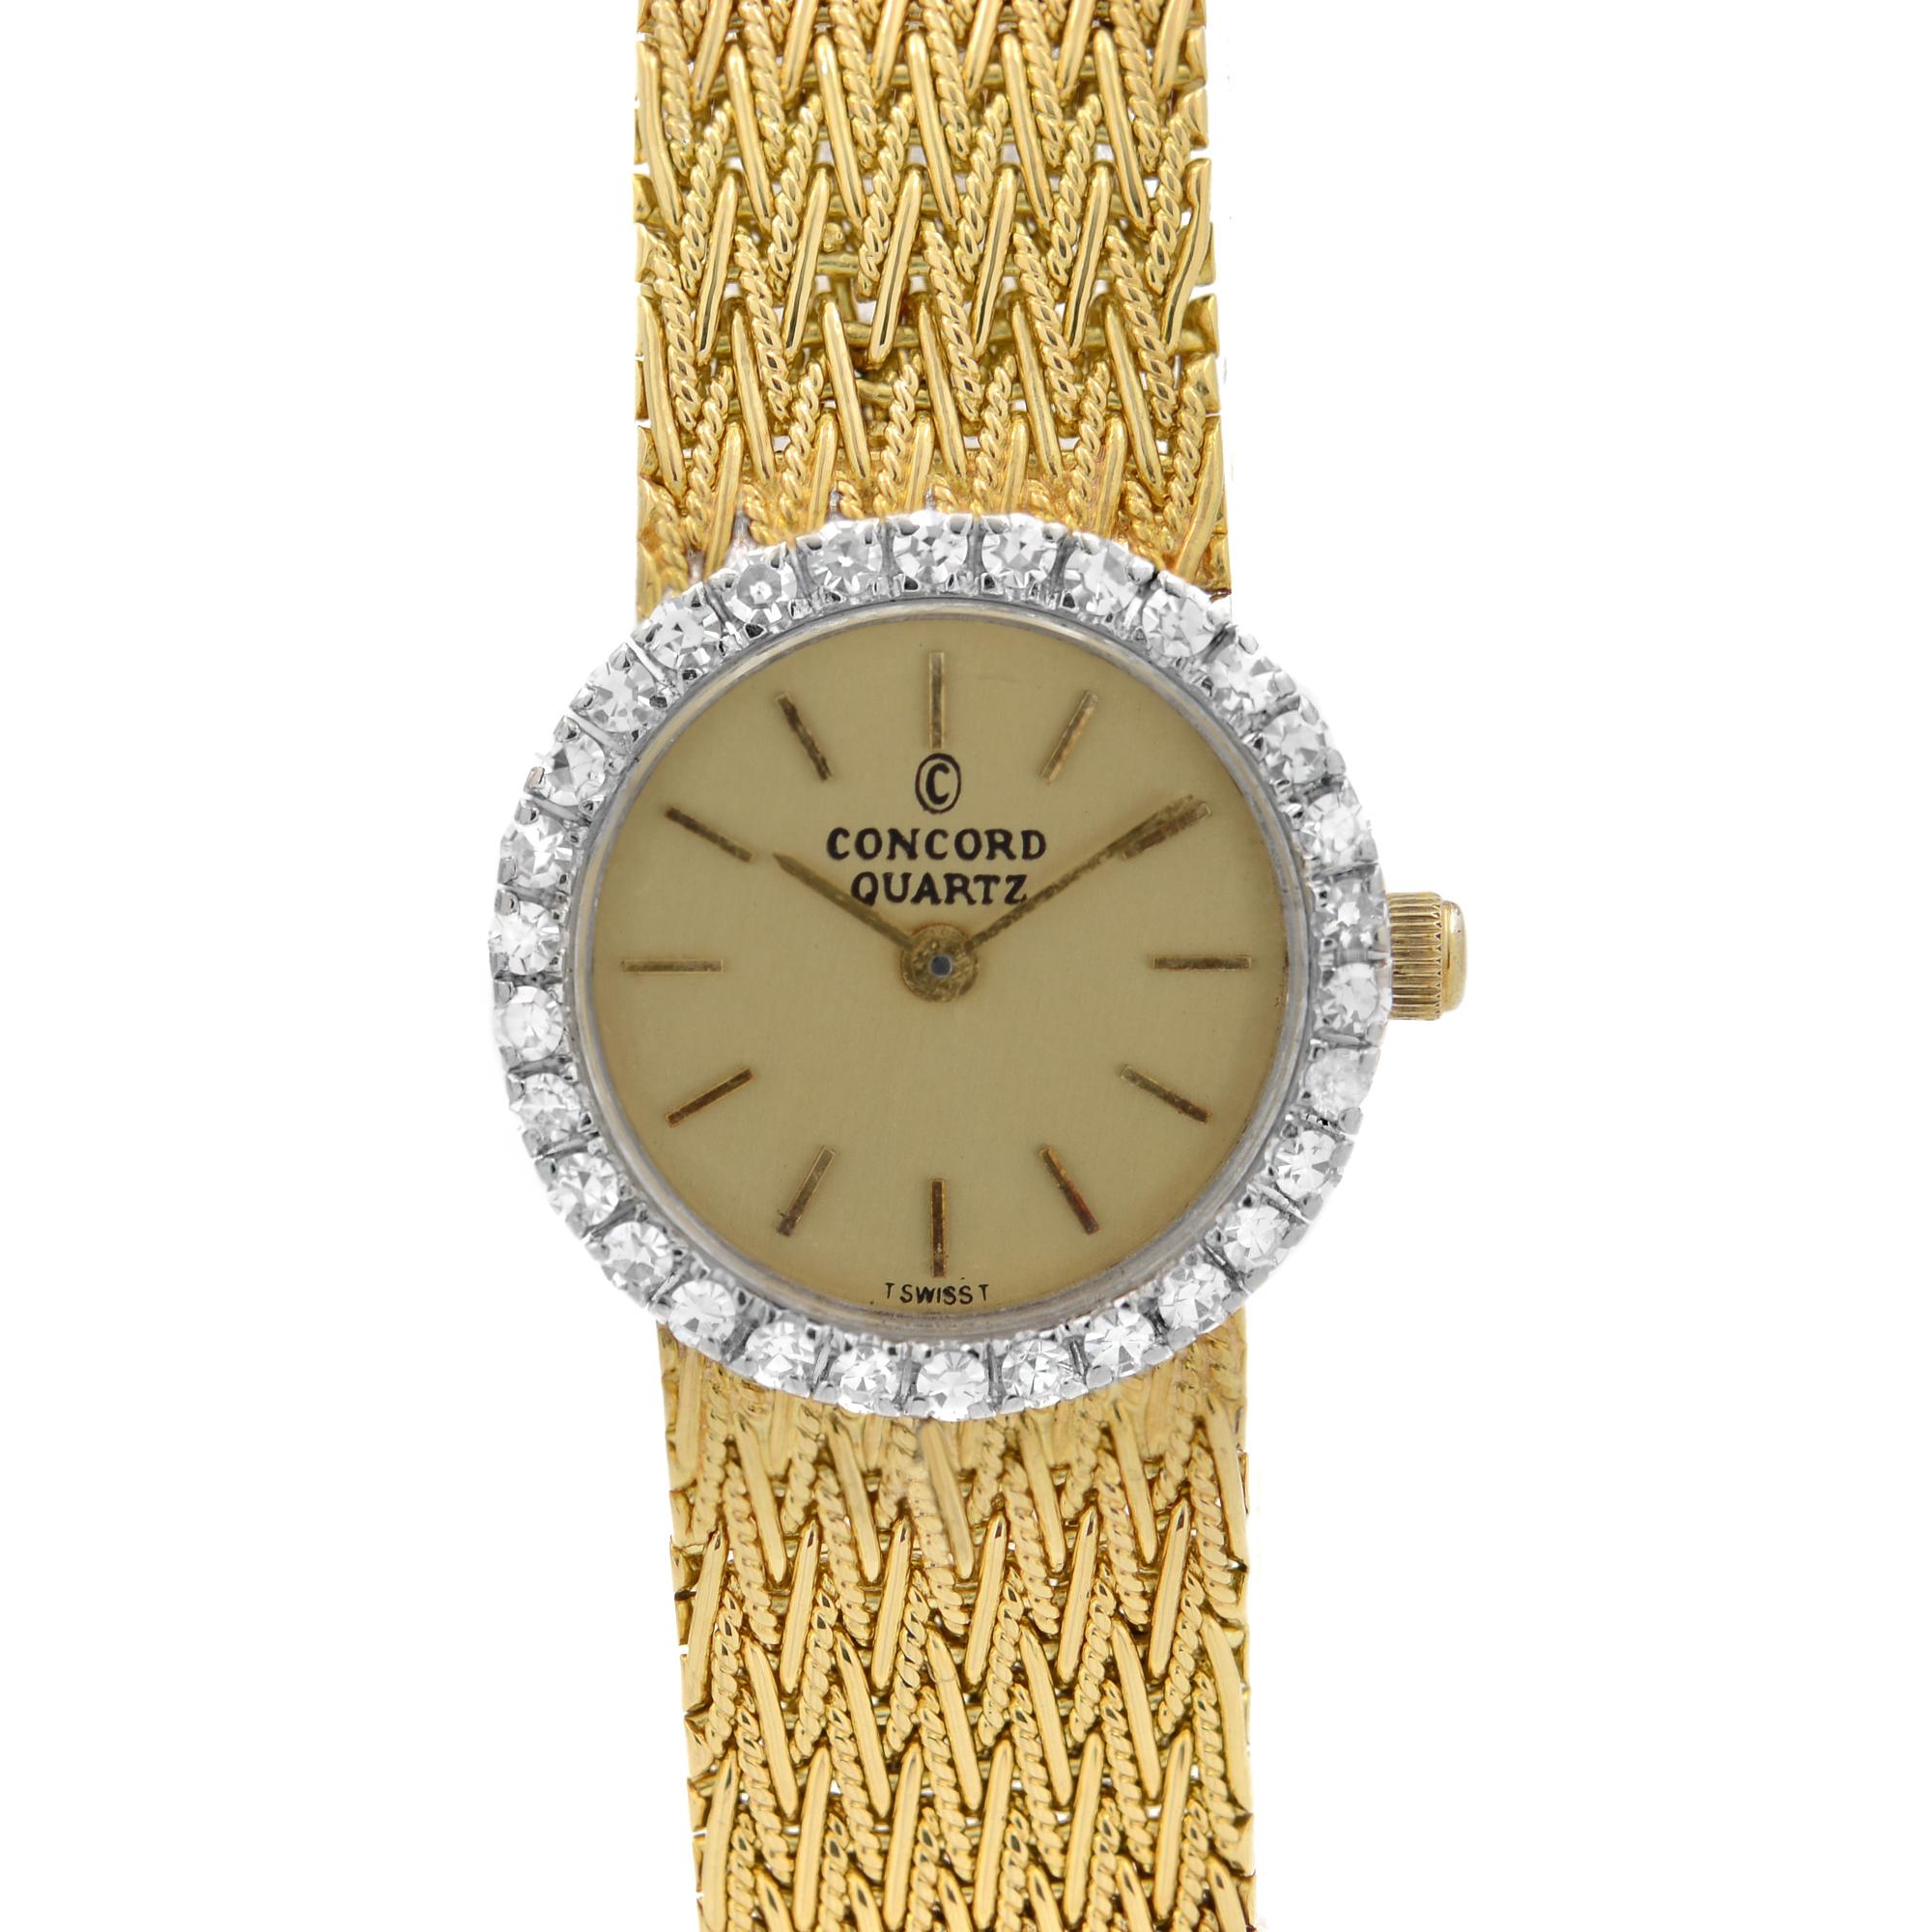 Pre Owned Concord 18K Yellow & White Gold Factory Diamond Bezel Quartz Ladies Watch 5161253. This Beautiful Timepiece is Powered by Quartz (Battery) Movement And Features: 18k Yellow Gold Case with an 18k Yellow Gold Mesh Bracelet that has a Jewelry